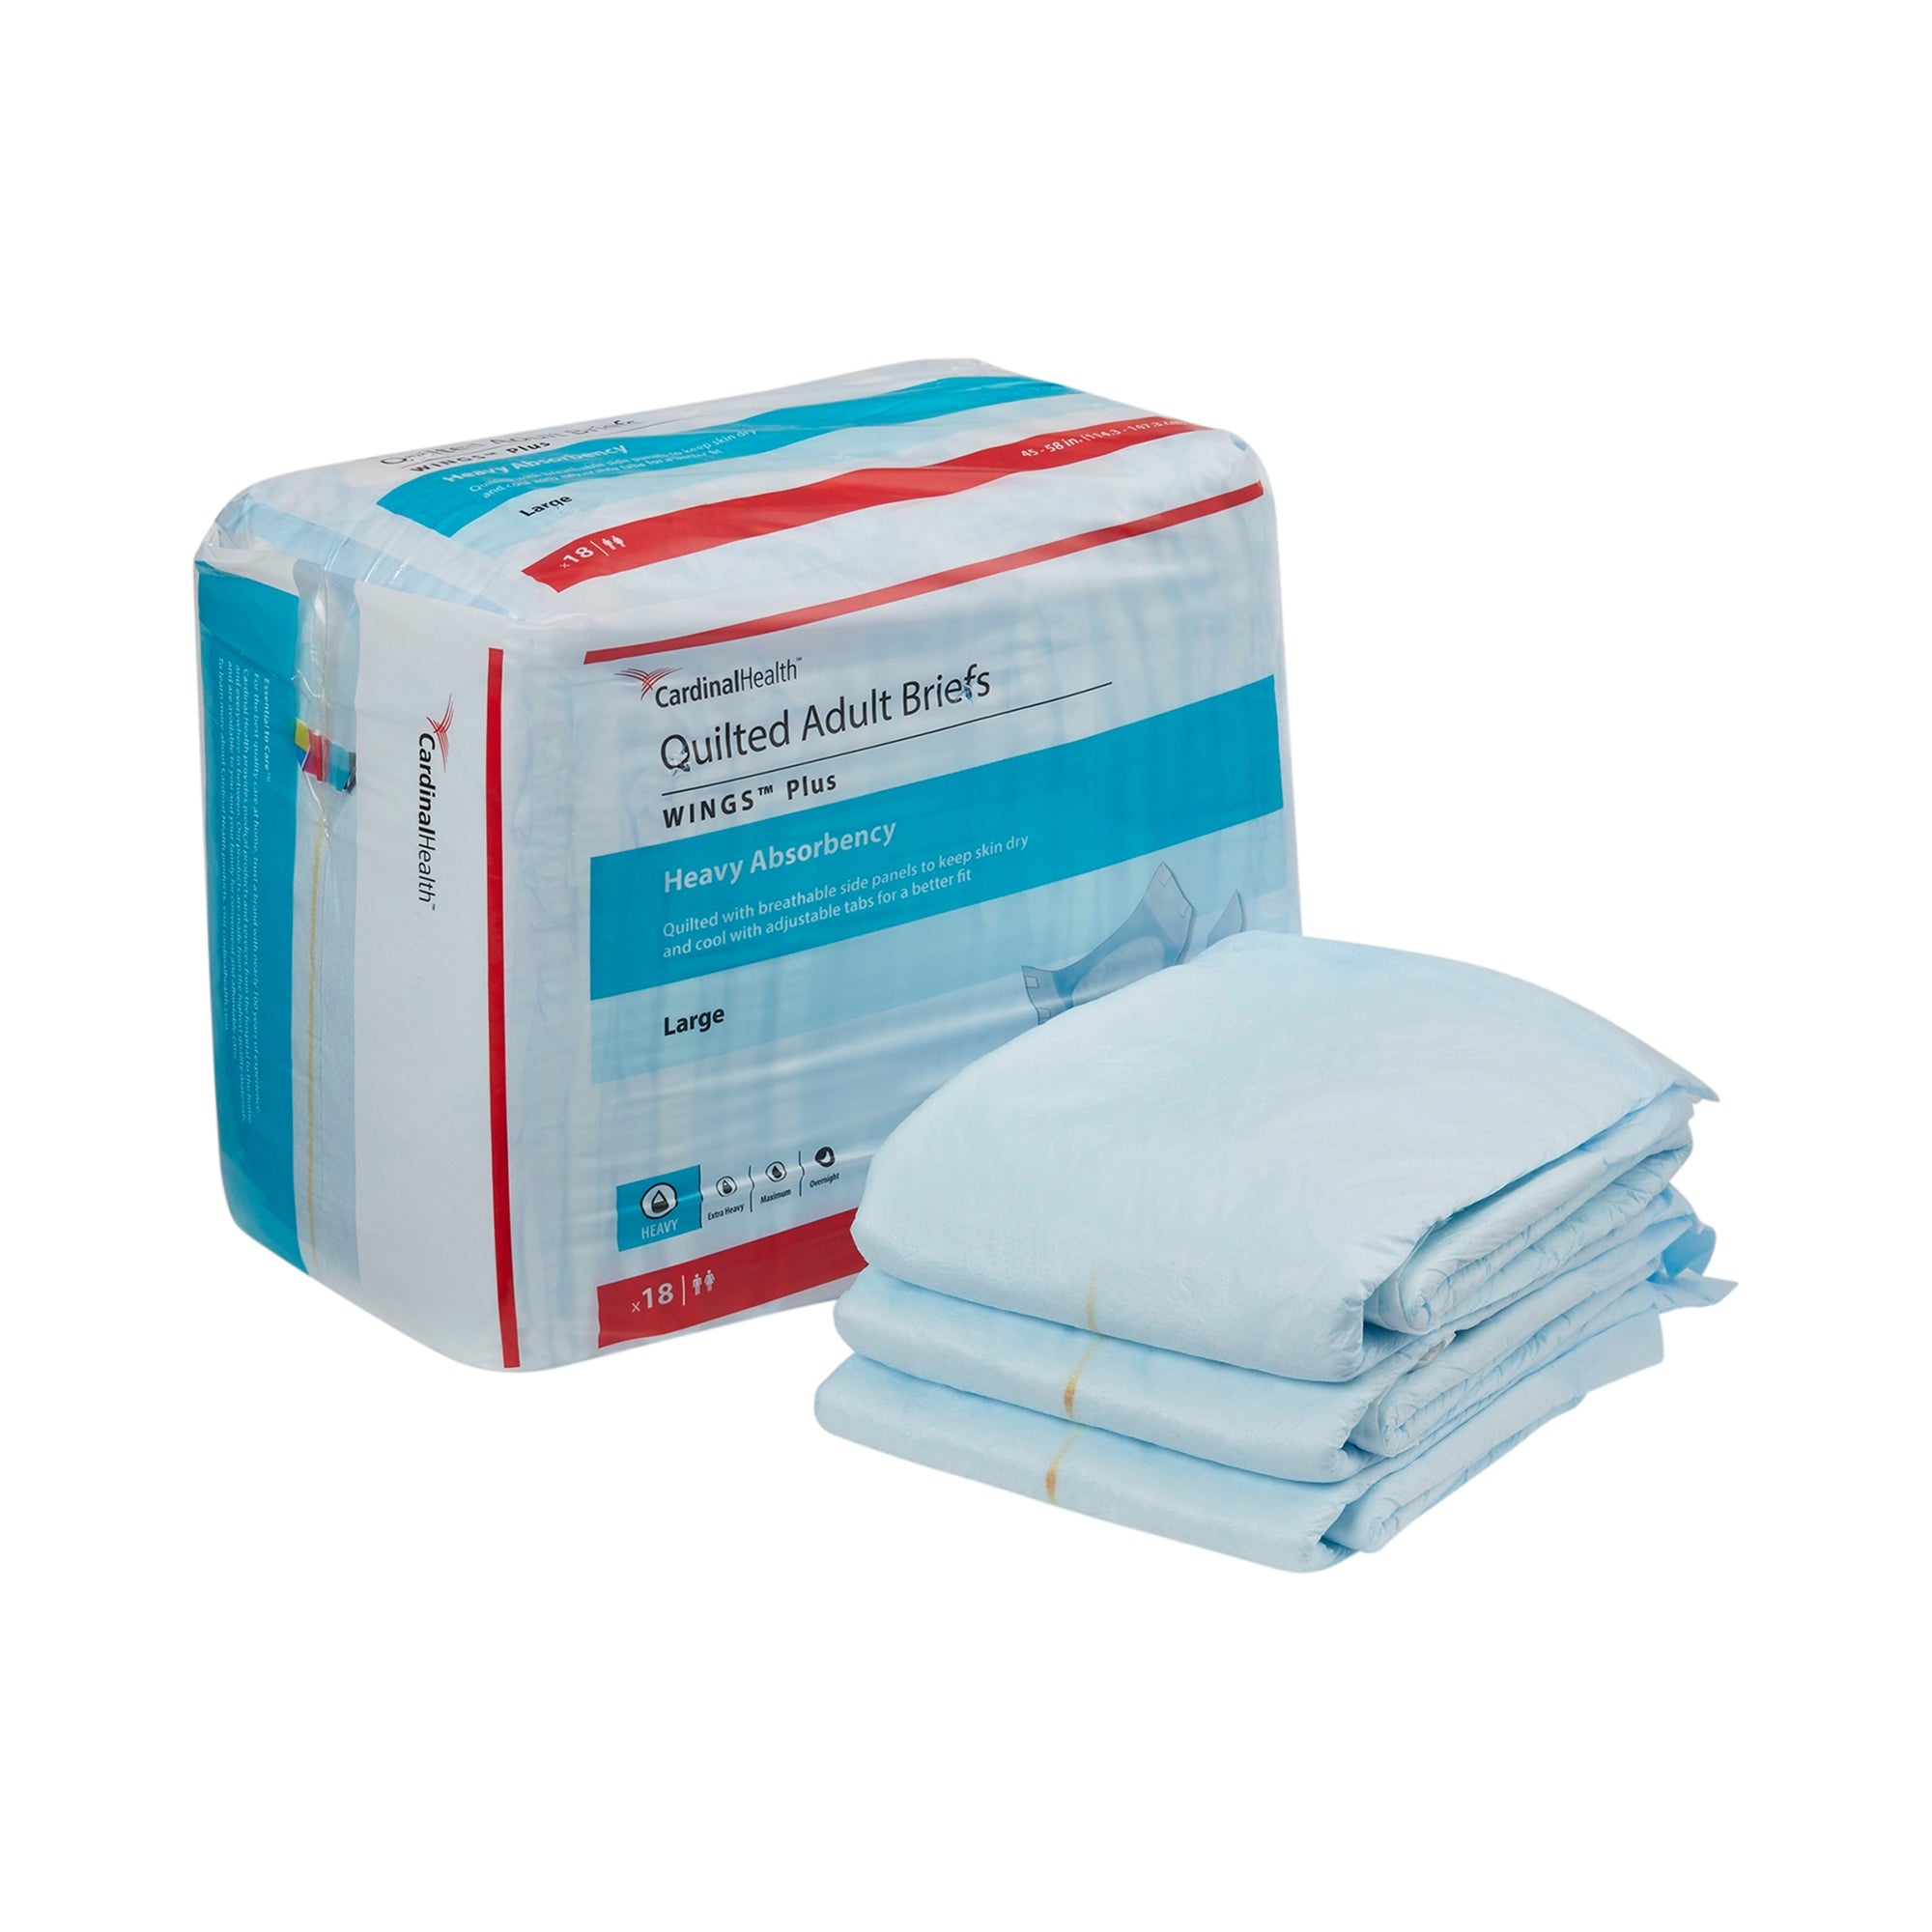 Wings™ Plus Quilted Heavy Absorbency Brief, Large - Unisex Adult Incontinence